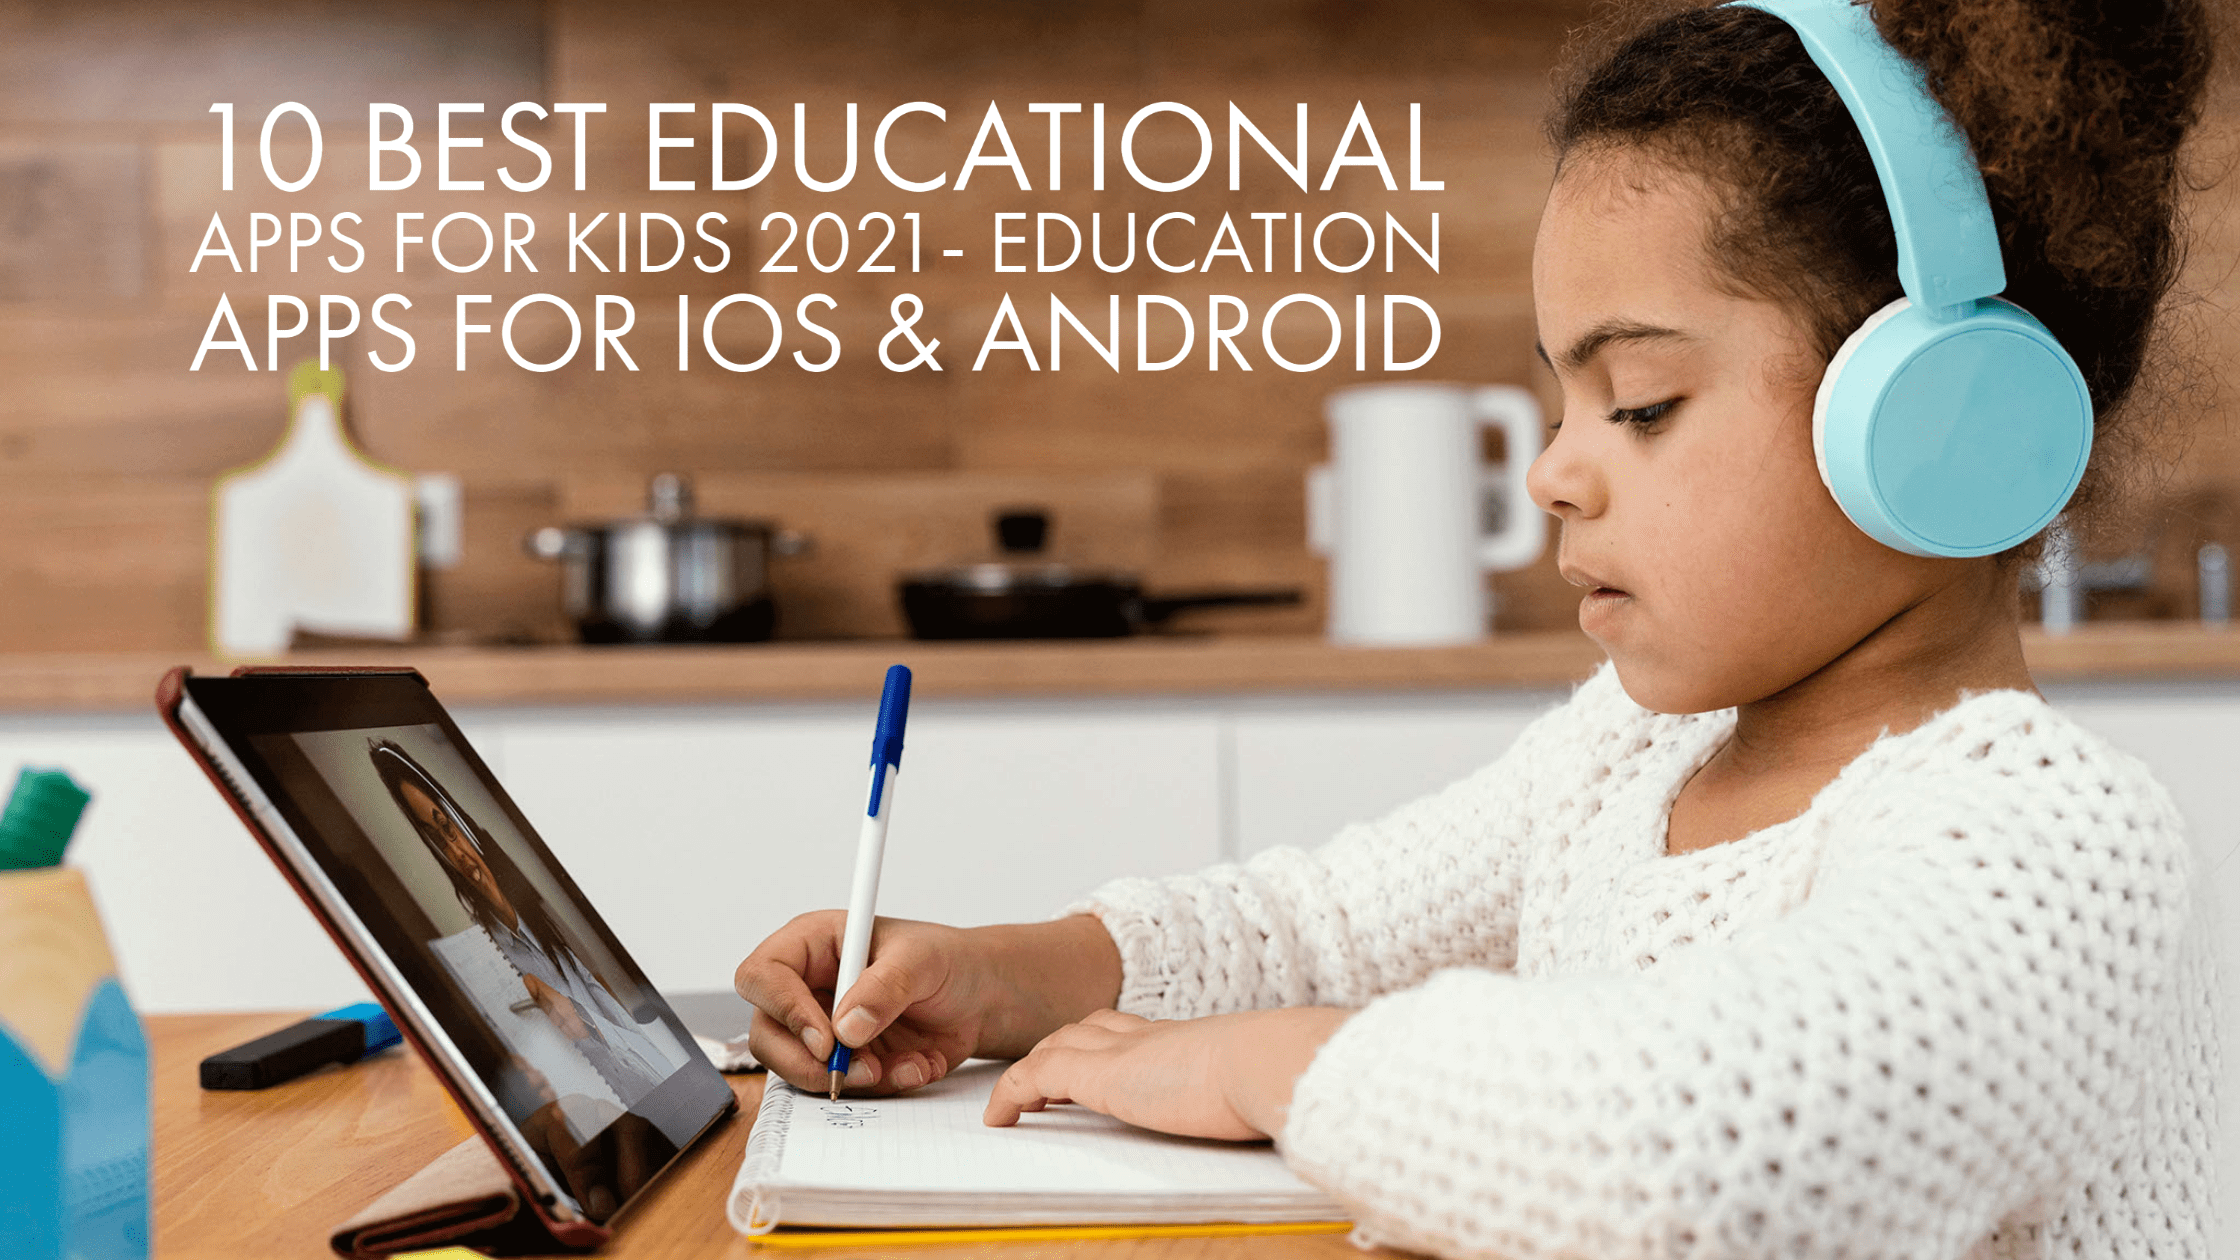 10 best educational apps for kids in 2021